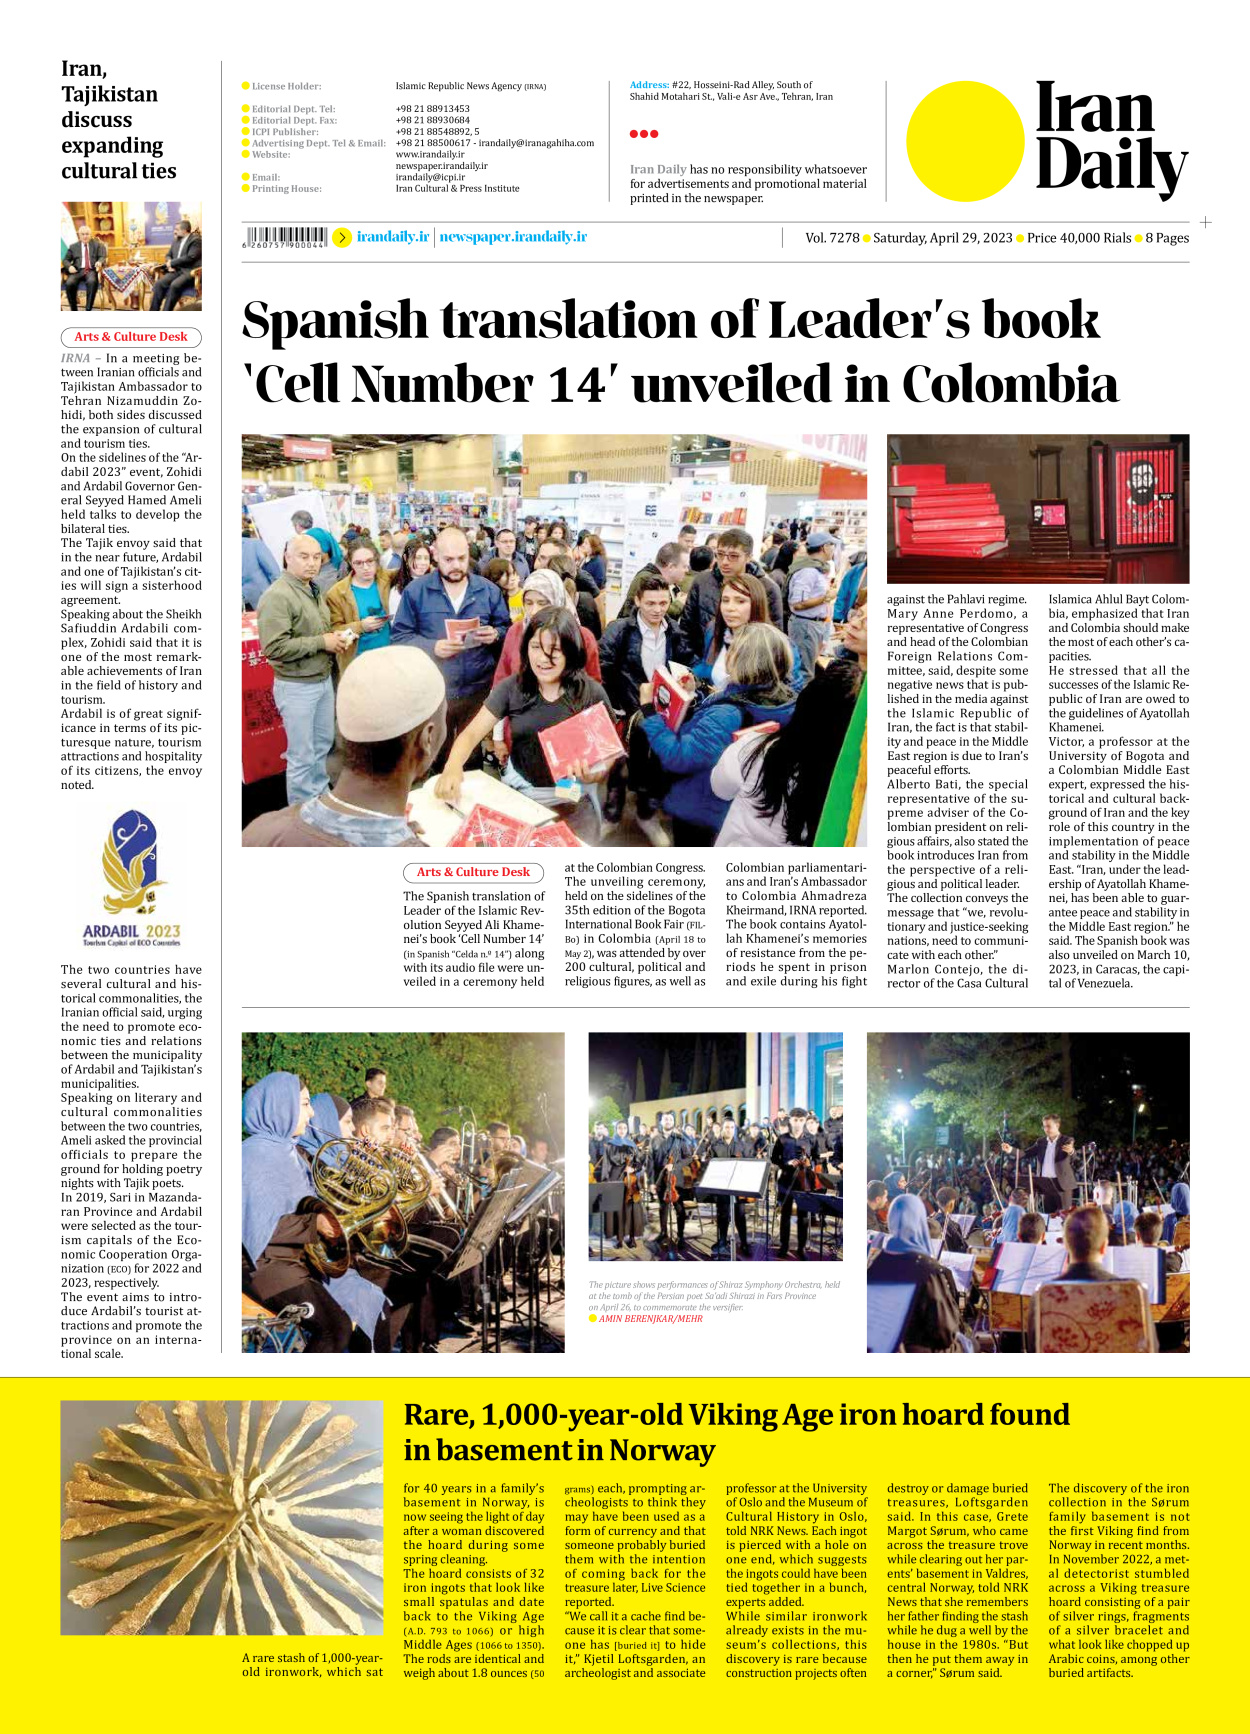 Iran Daily - Number Seven Thousand Two Hundred and Seventy Eight - 29 April 2023 - Page 8